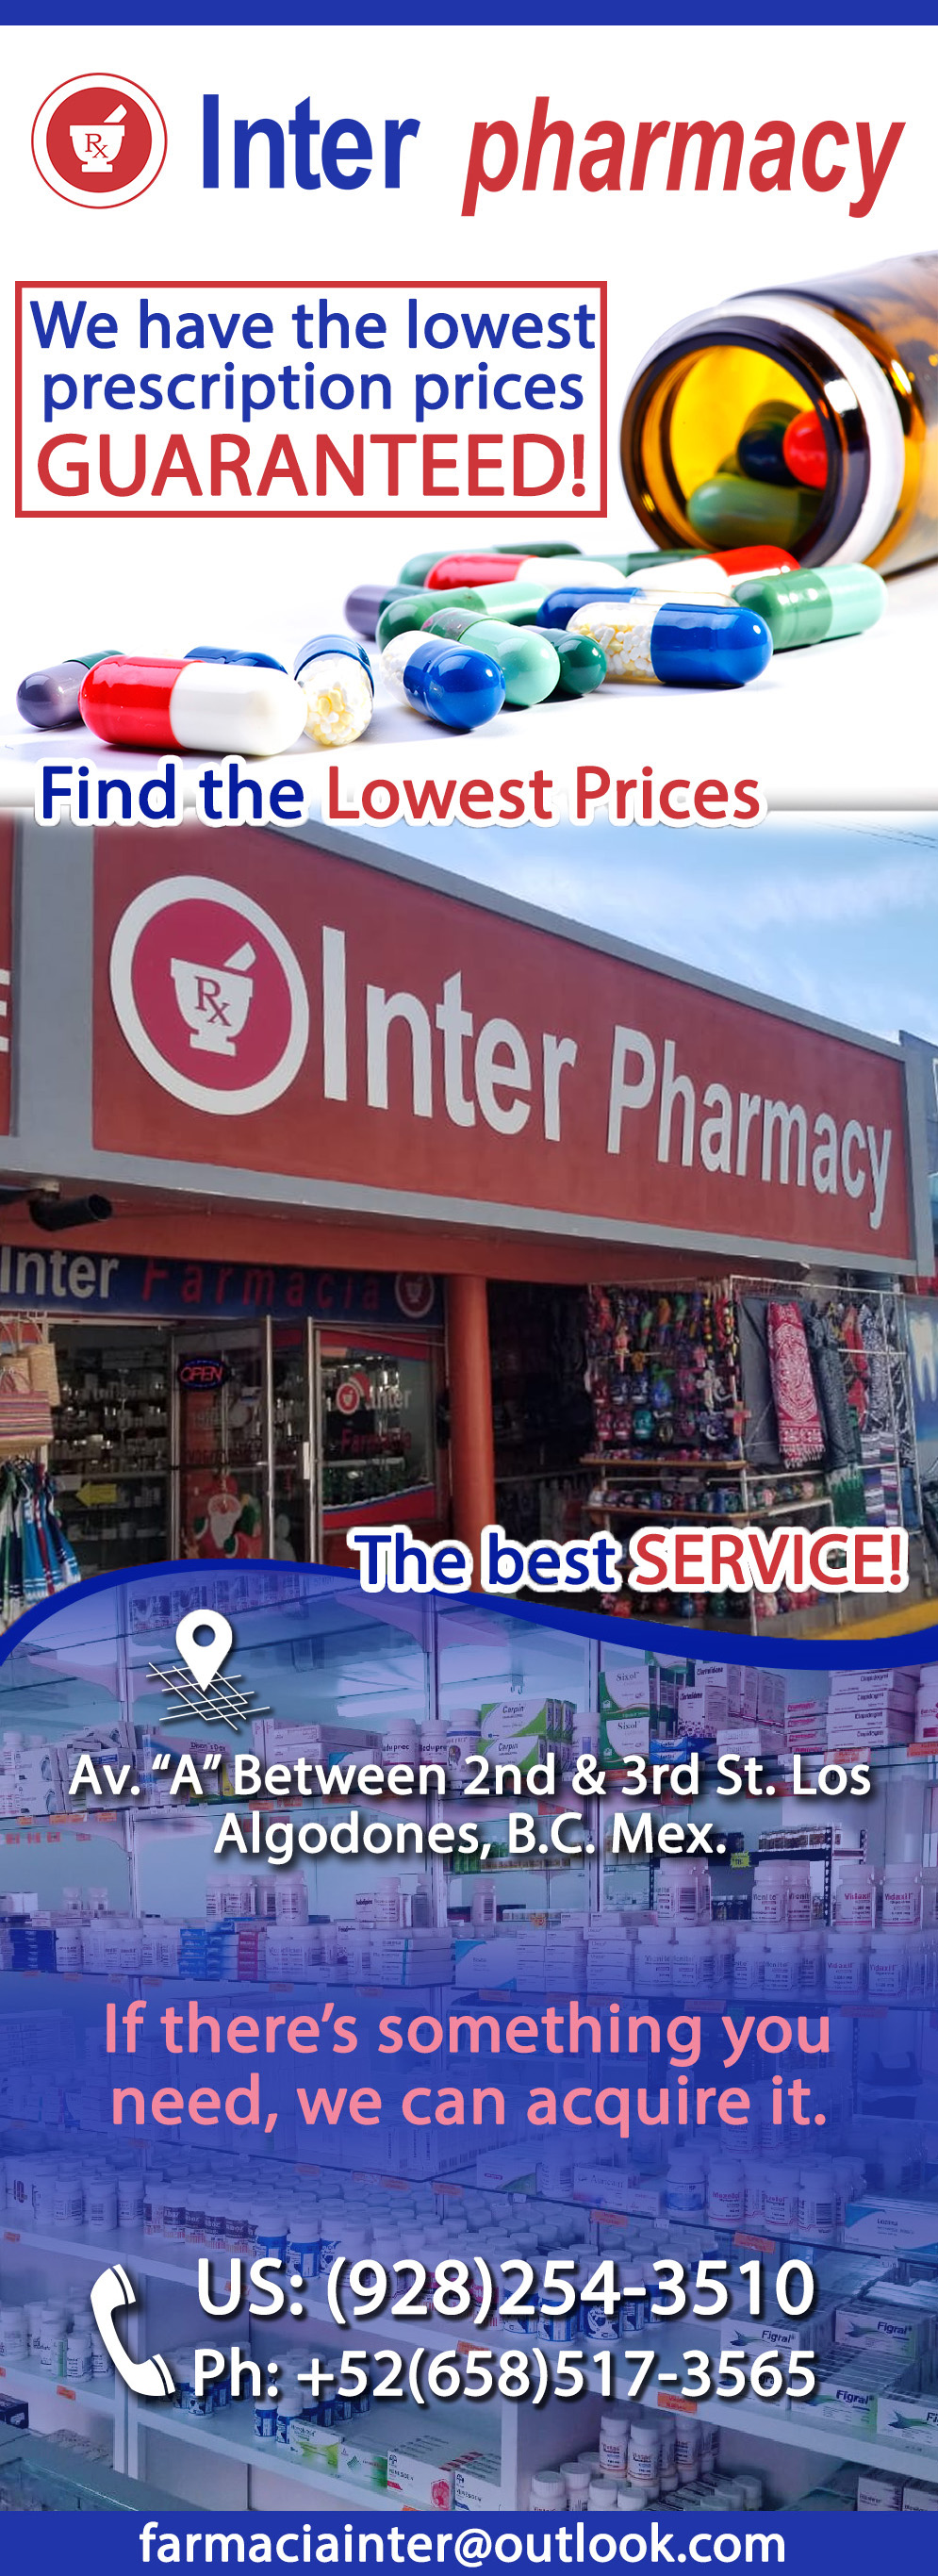 Inter Pharmacy-Pharmacy in Algodones, Mexico. We have the lowest prescription prices, GUARANTEED!!
The  best Service. If theres something you need, we can acquire it. 